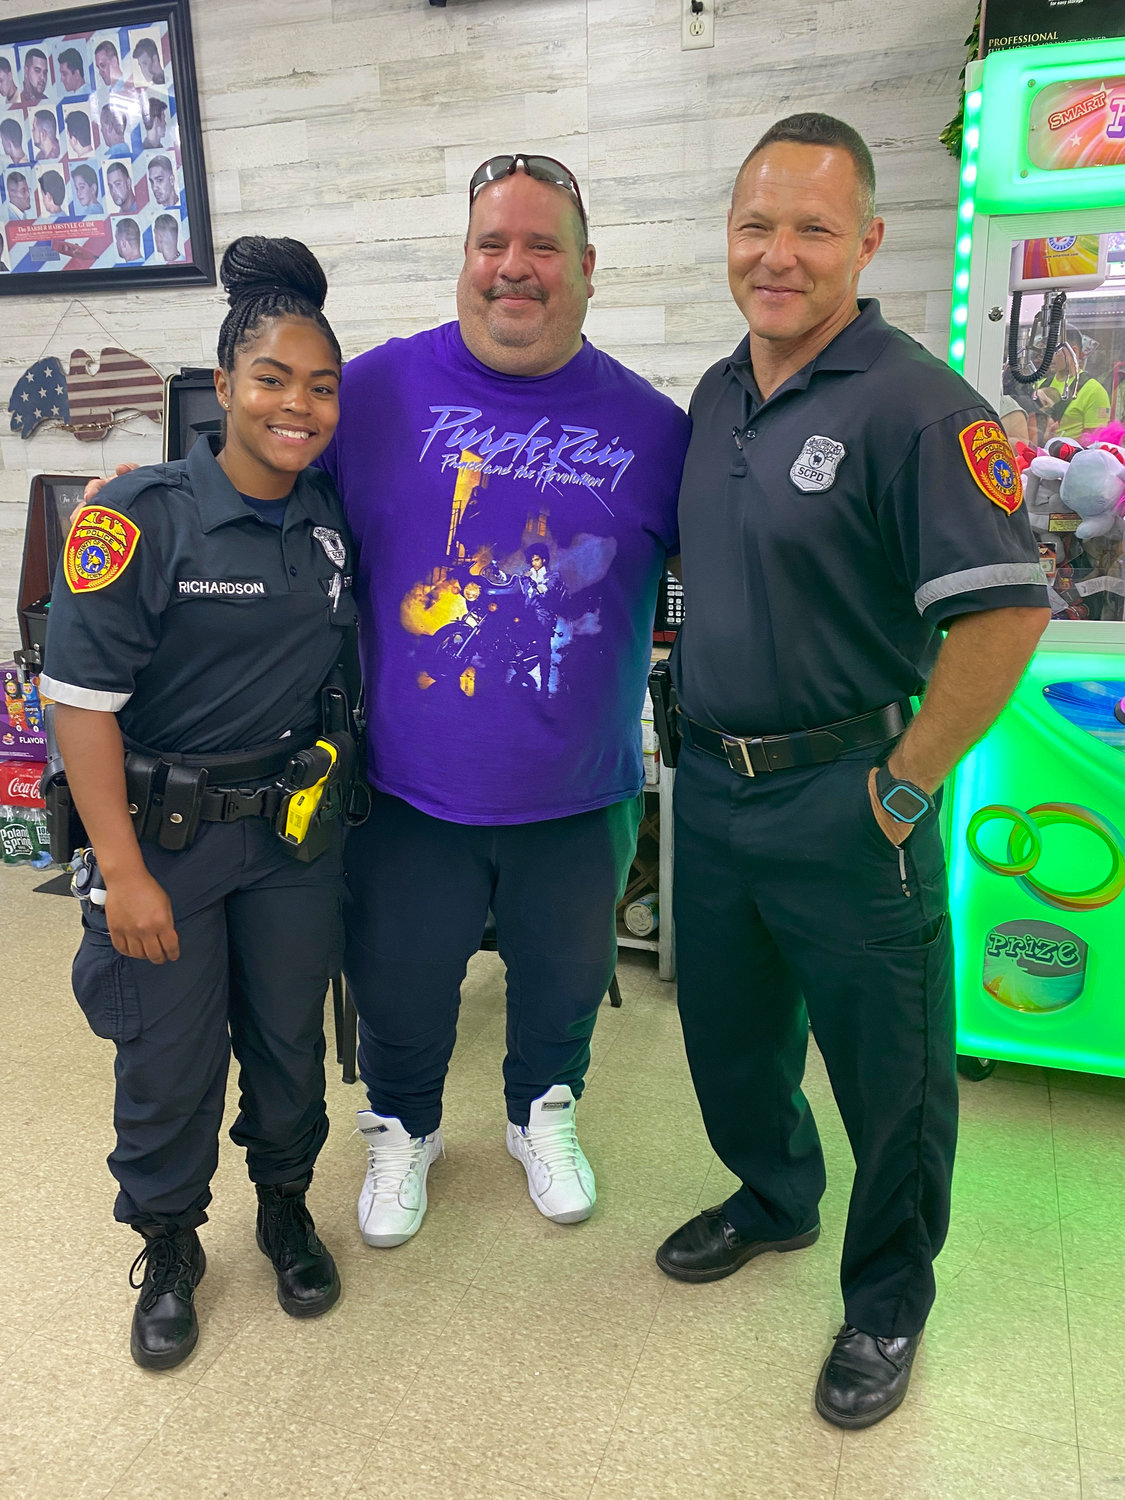 Officer Richardson, of the Suffolk County Community Relations Bureau; Jeffrey Manzolillo, owner of Jenny’s JNT Beauty Barbershop; and Officer Frank Raspanti, community liaison for the 7th Precinct.